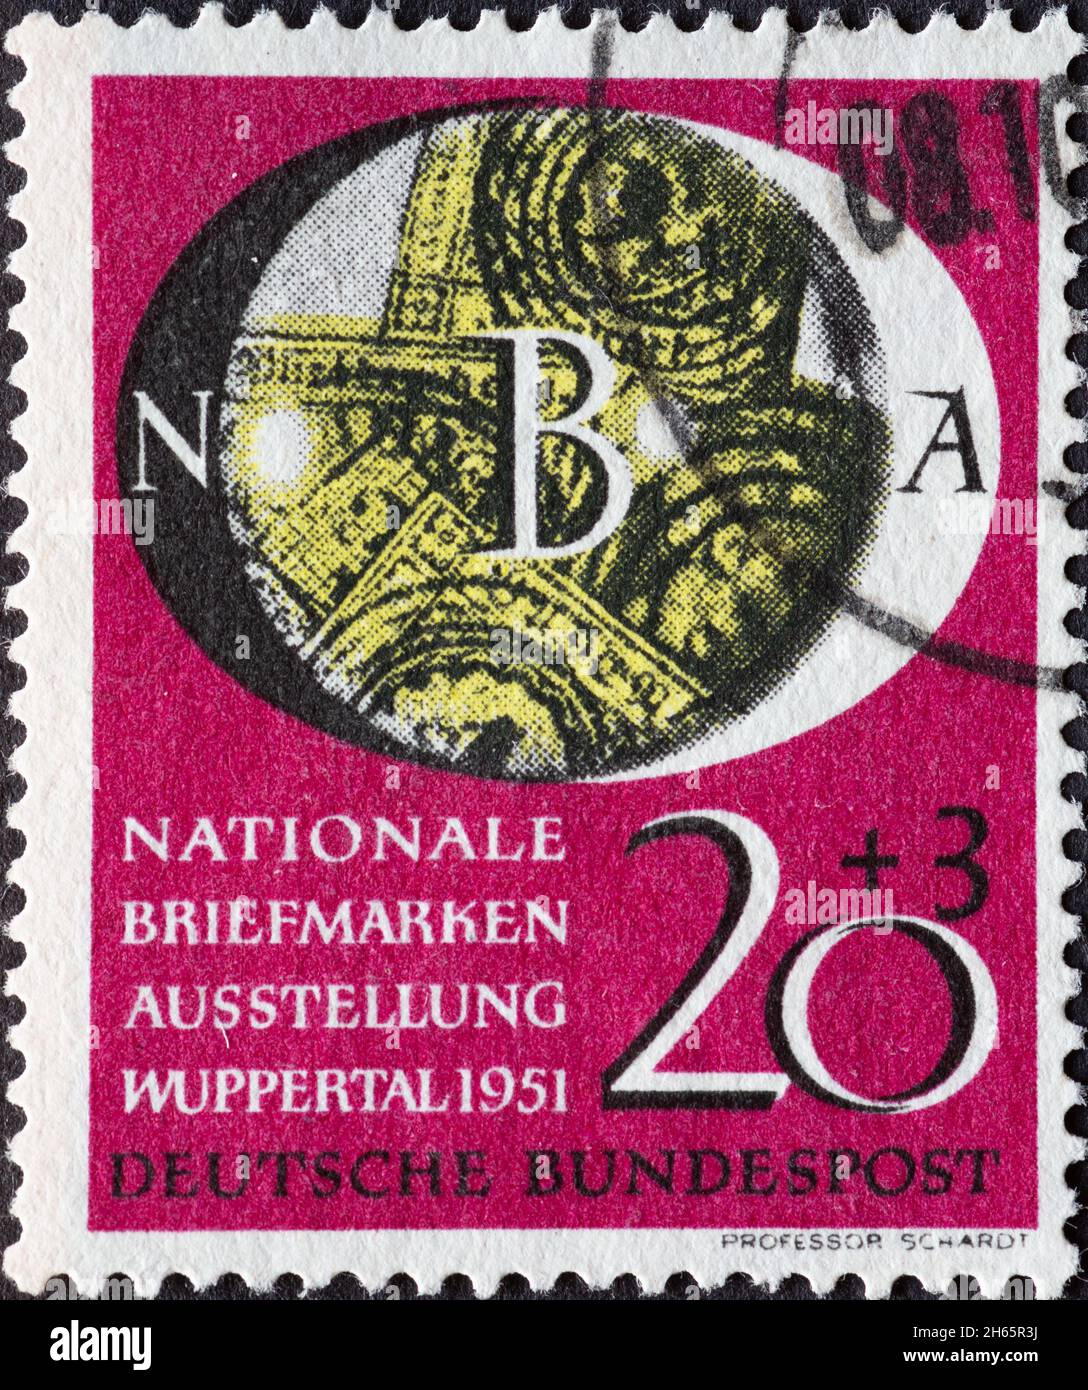 GERMANY - CIRCA 1951: a postage stamp printed in Germany showing an image for the National stamp exhibition 1951 Wuppertal Germany circa 1951. Stock Photo